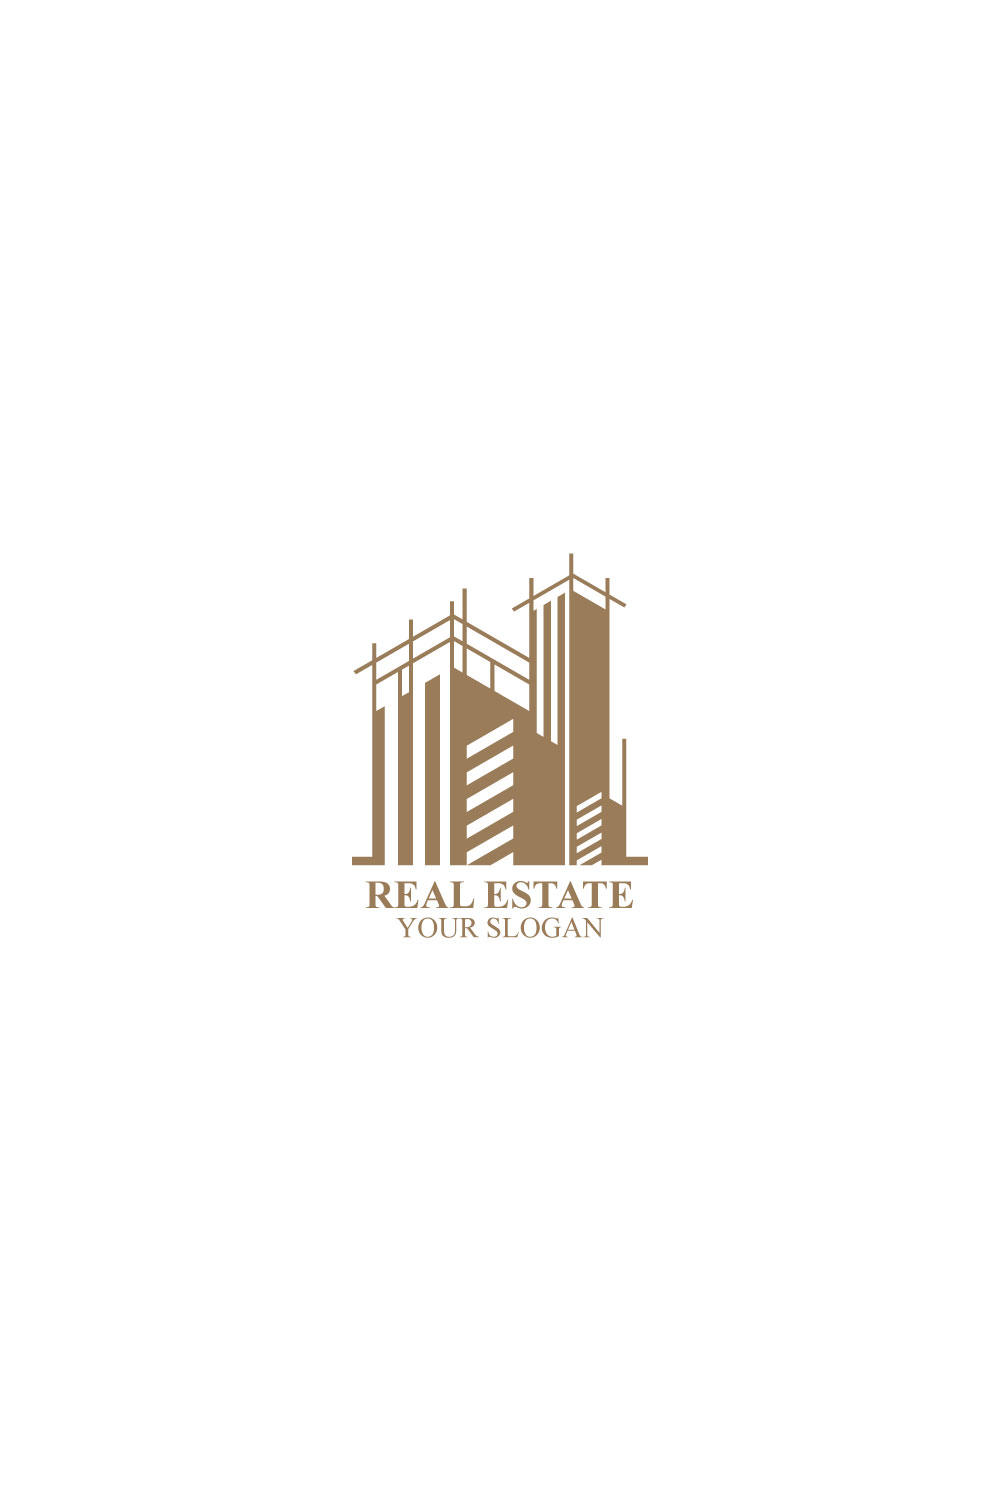 Initial yl logo for real estate with simple Vector Image